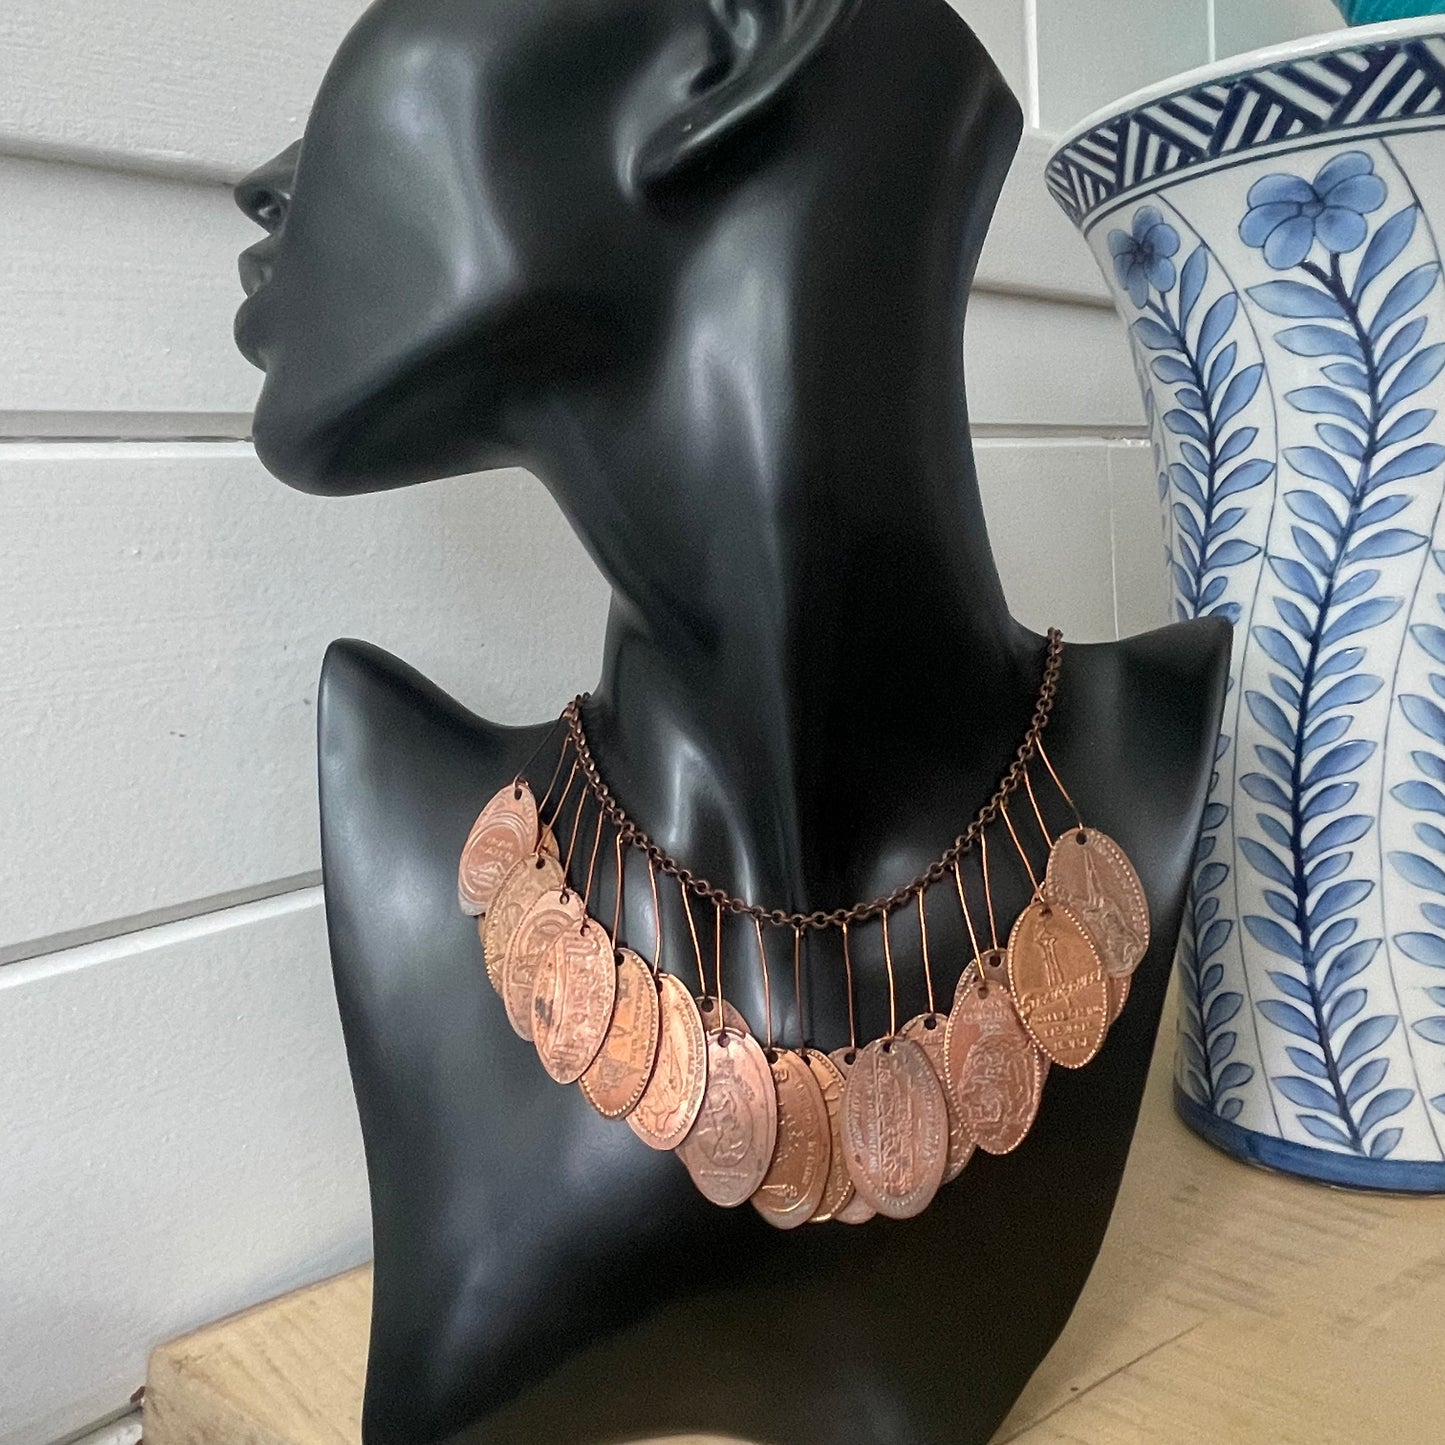 Unique Dangling Flattened Penny Statement Necklace 16.75" Drama Avant Garde Upcycled Industrial